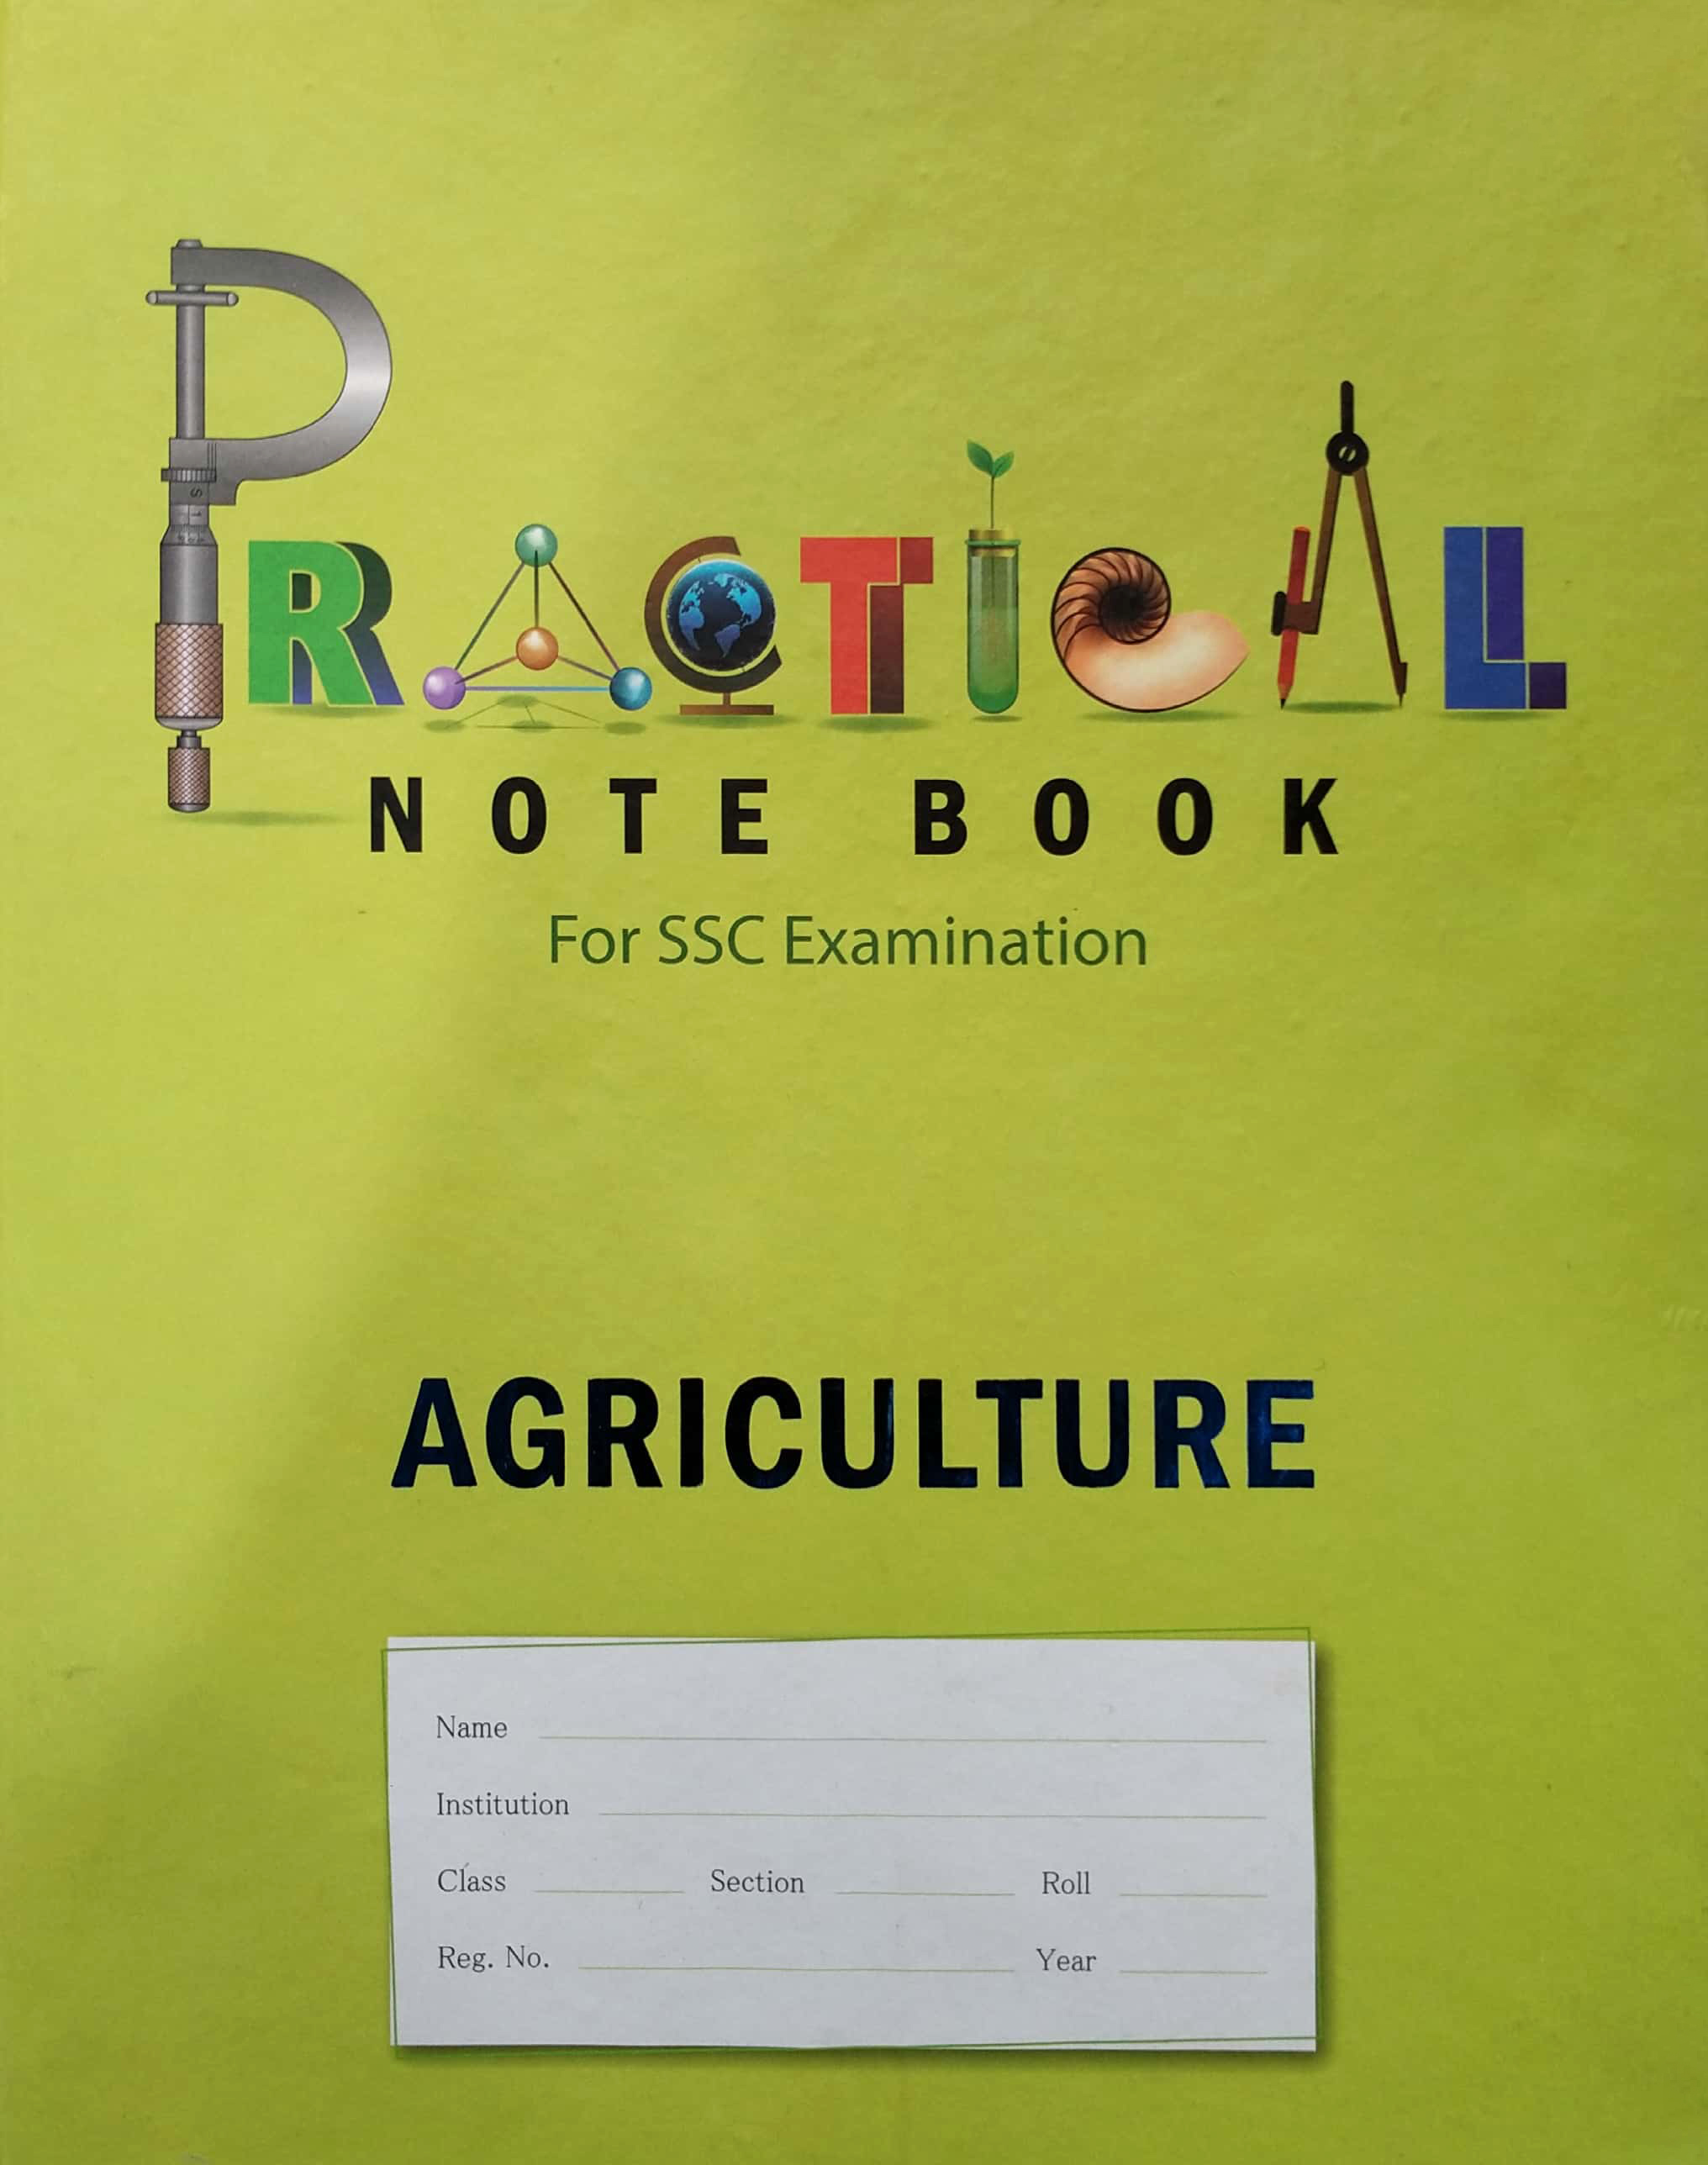 Panjeree Agriculture SSC Practical Note Book